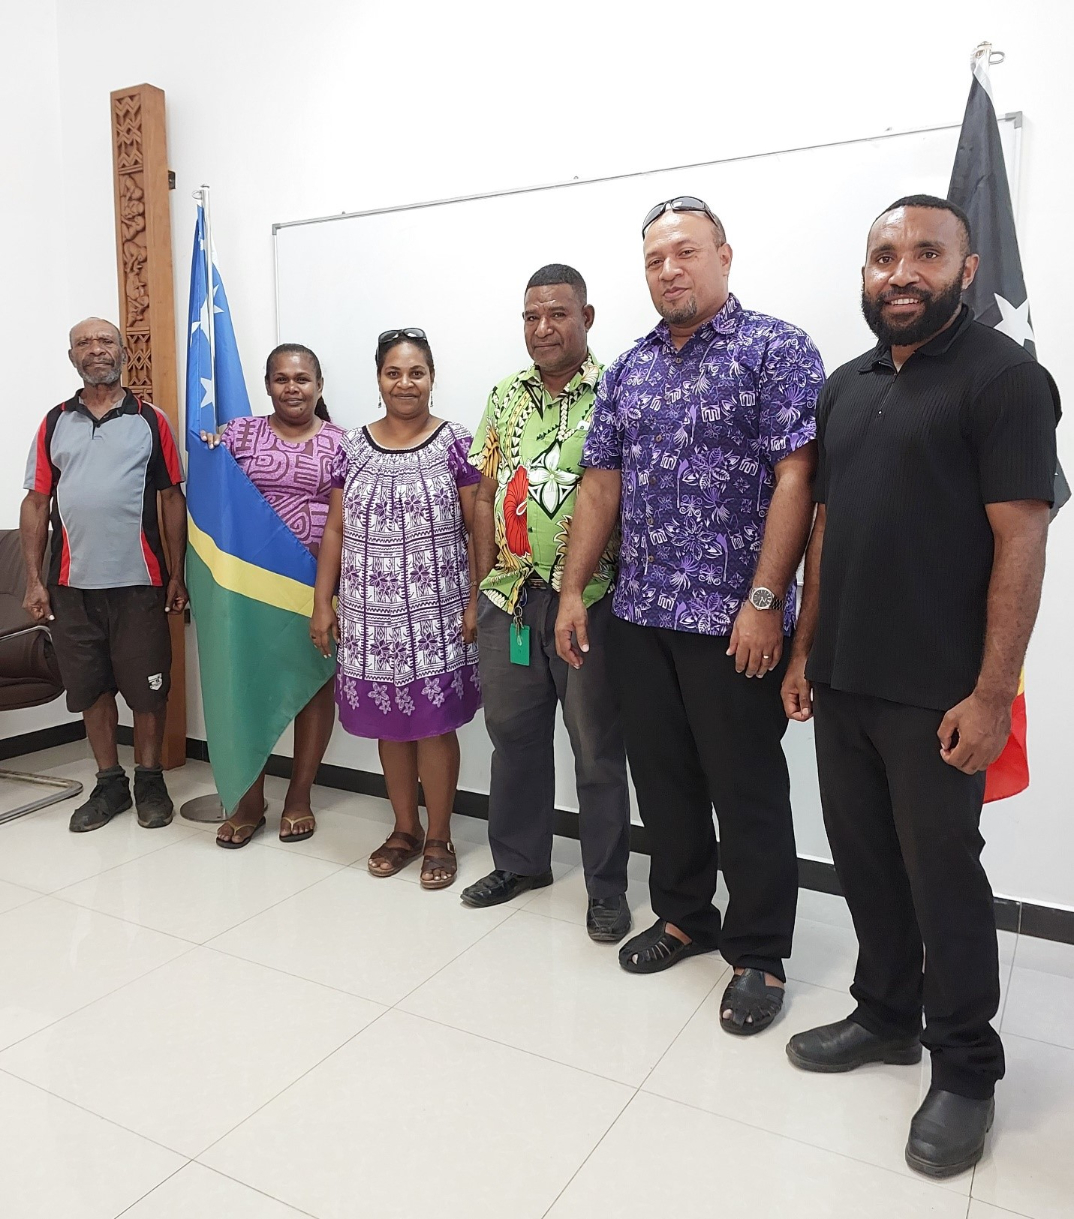 Port Moresby mission joins MFAET HQ in celebrating international women’s day